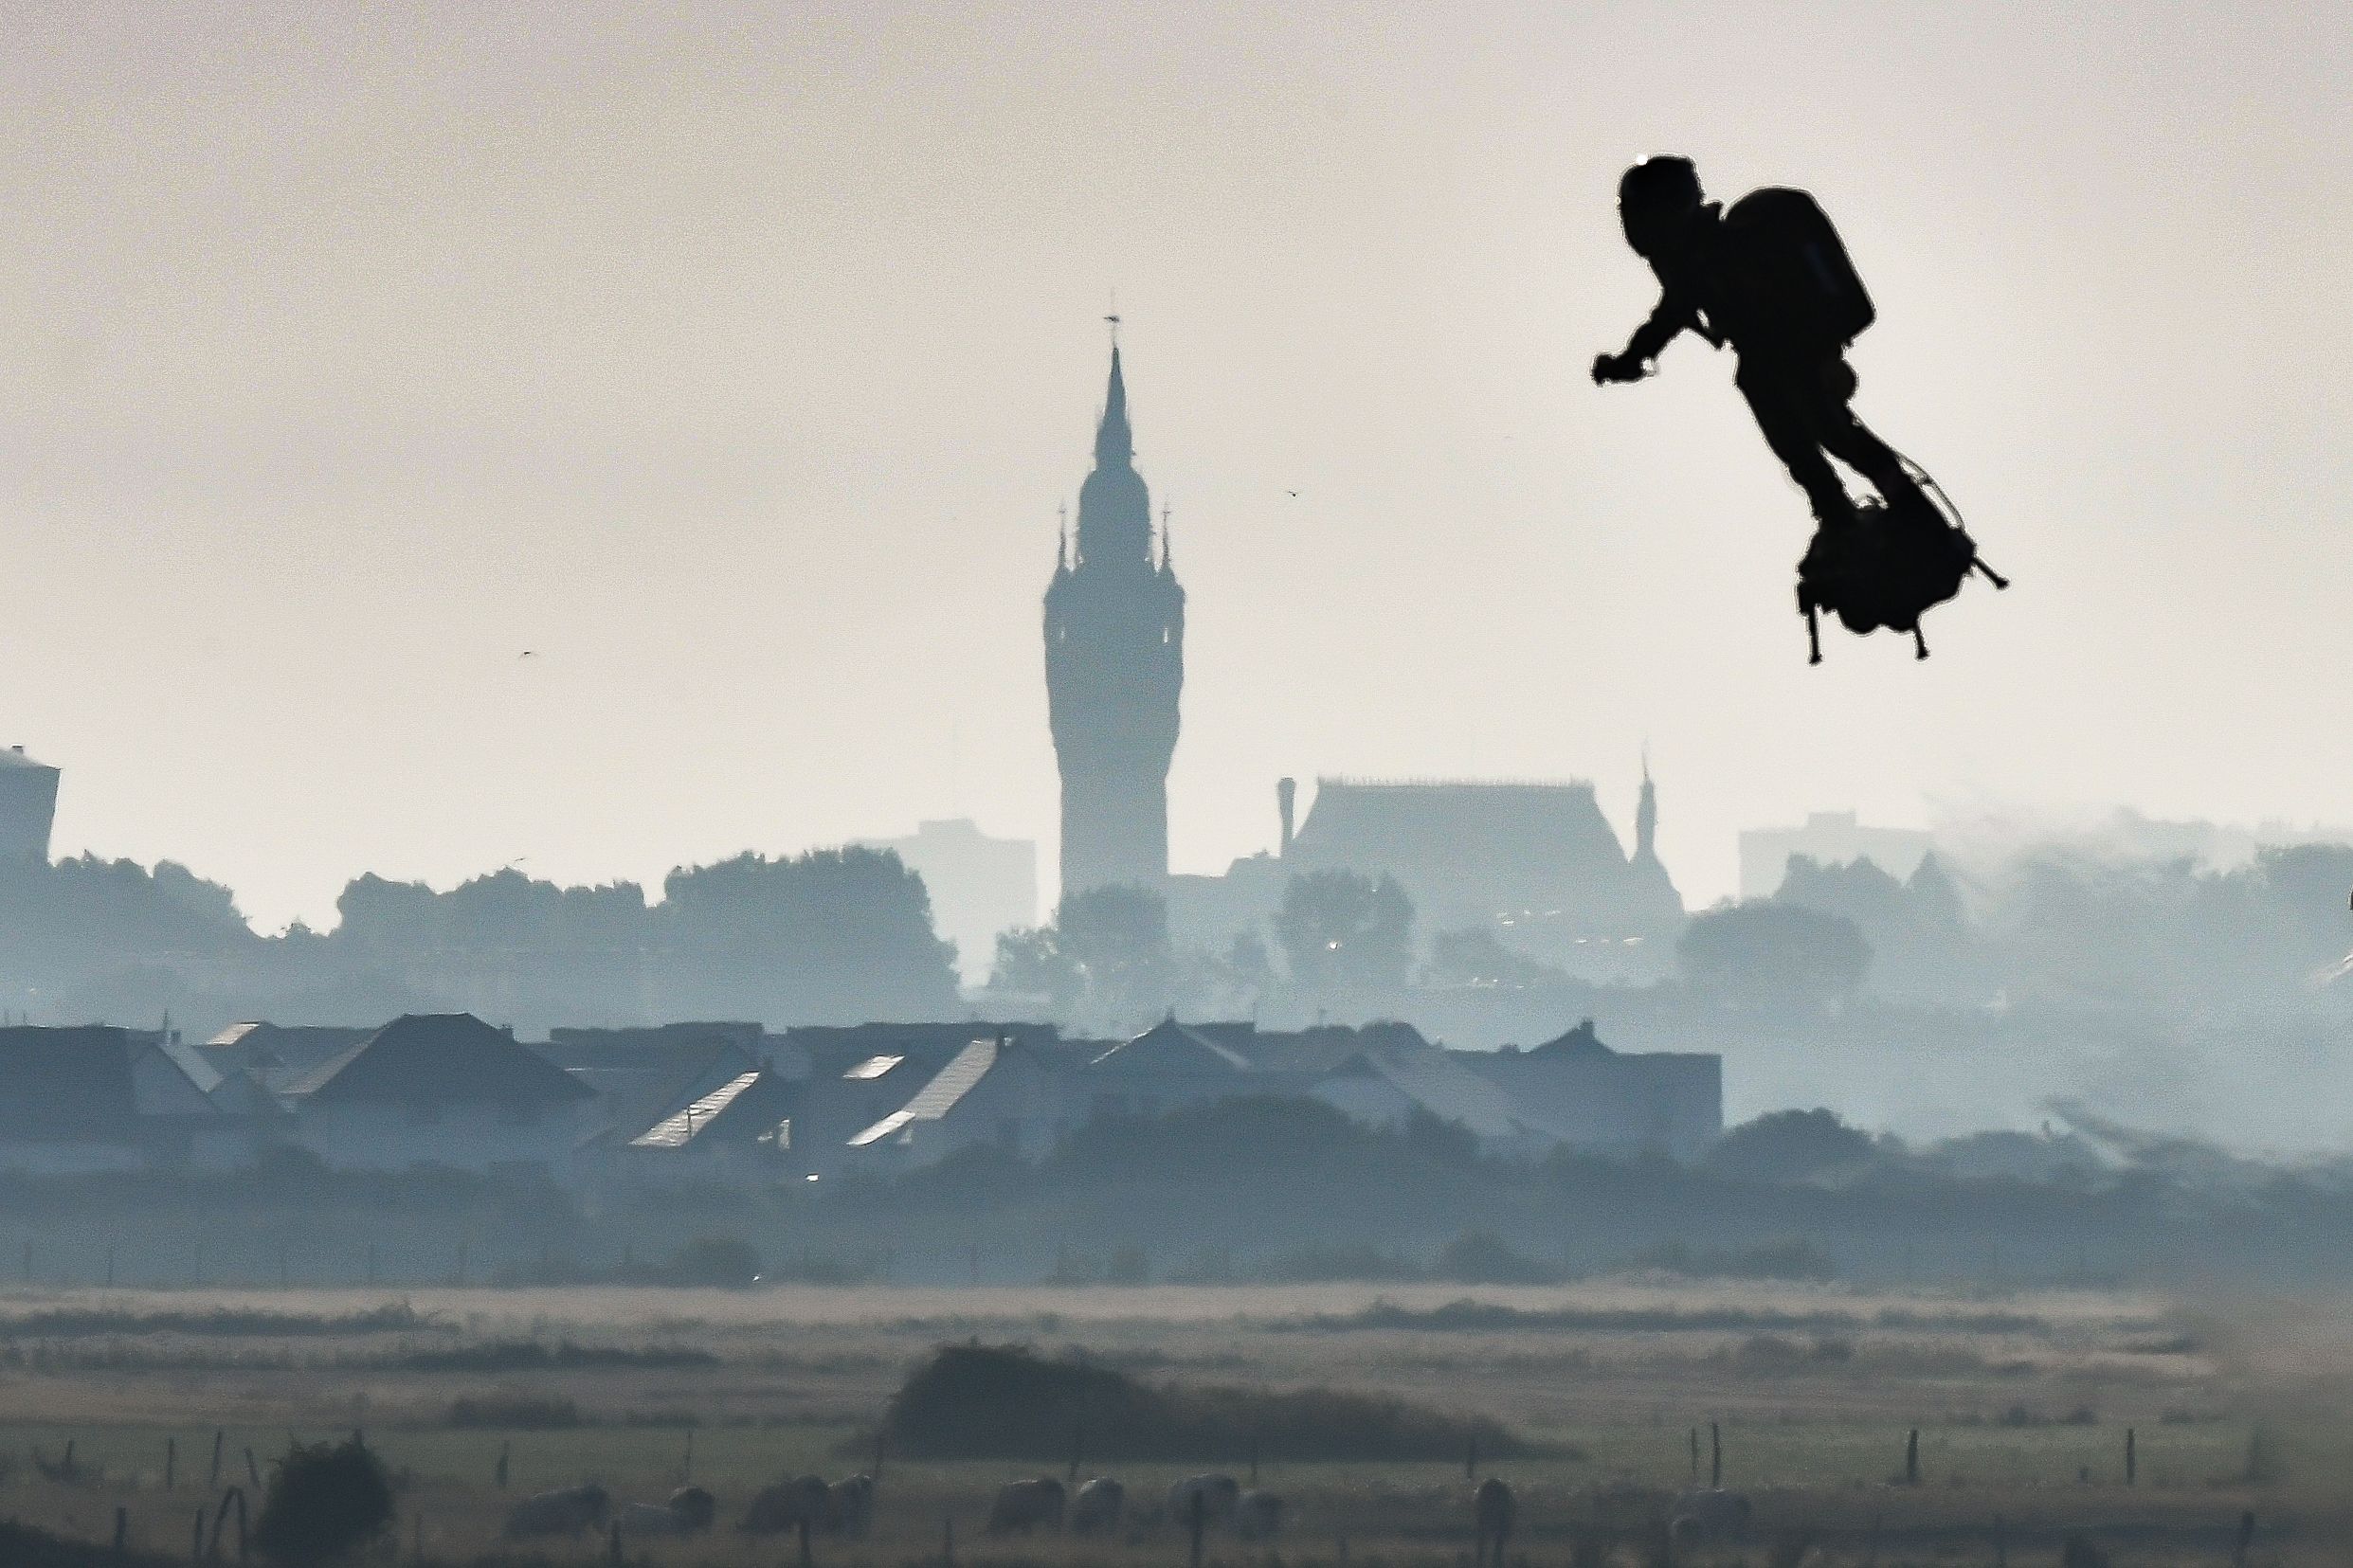 PHOTO: Franky Zapata on his jet-powered "flyboard" flies past the belfry of the city hall of Calais after he took off from Sangatte, northern France, on Aug. 4, 2019, during his attempt to fly across the 22-mile English Channel crossing in 20 minutes.